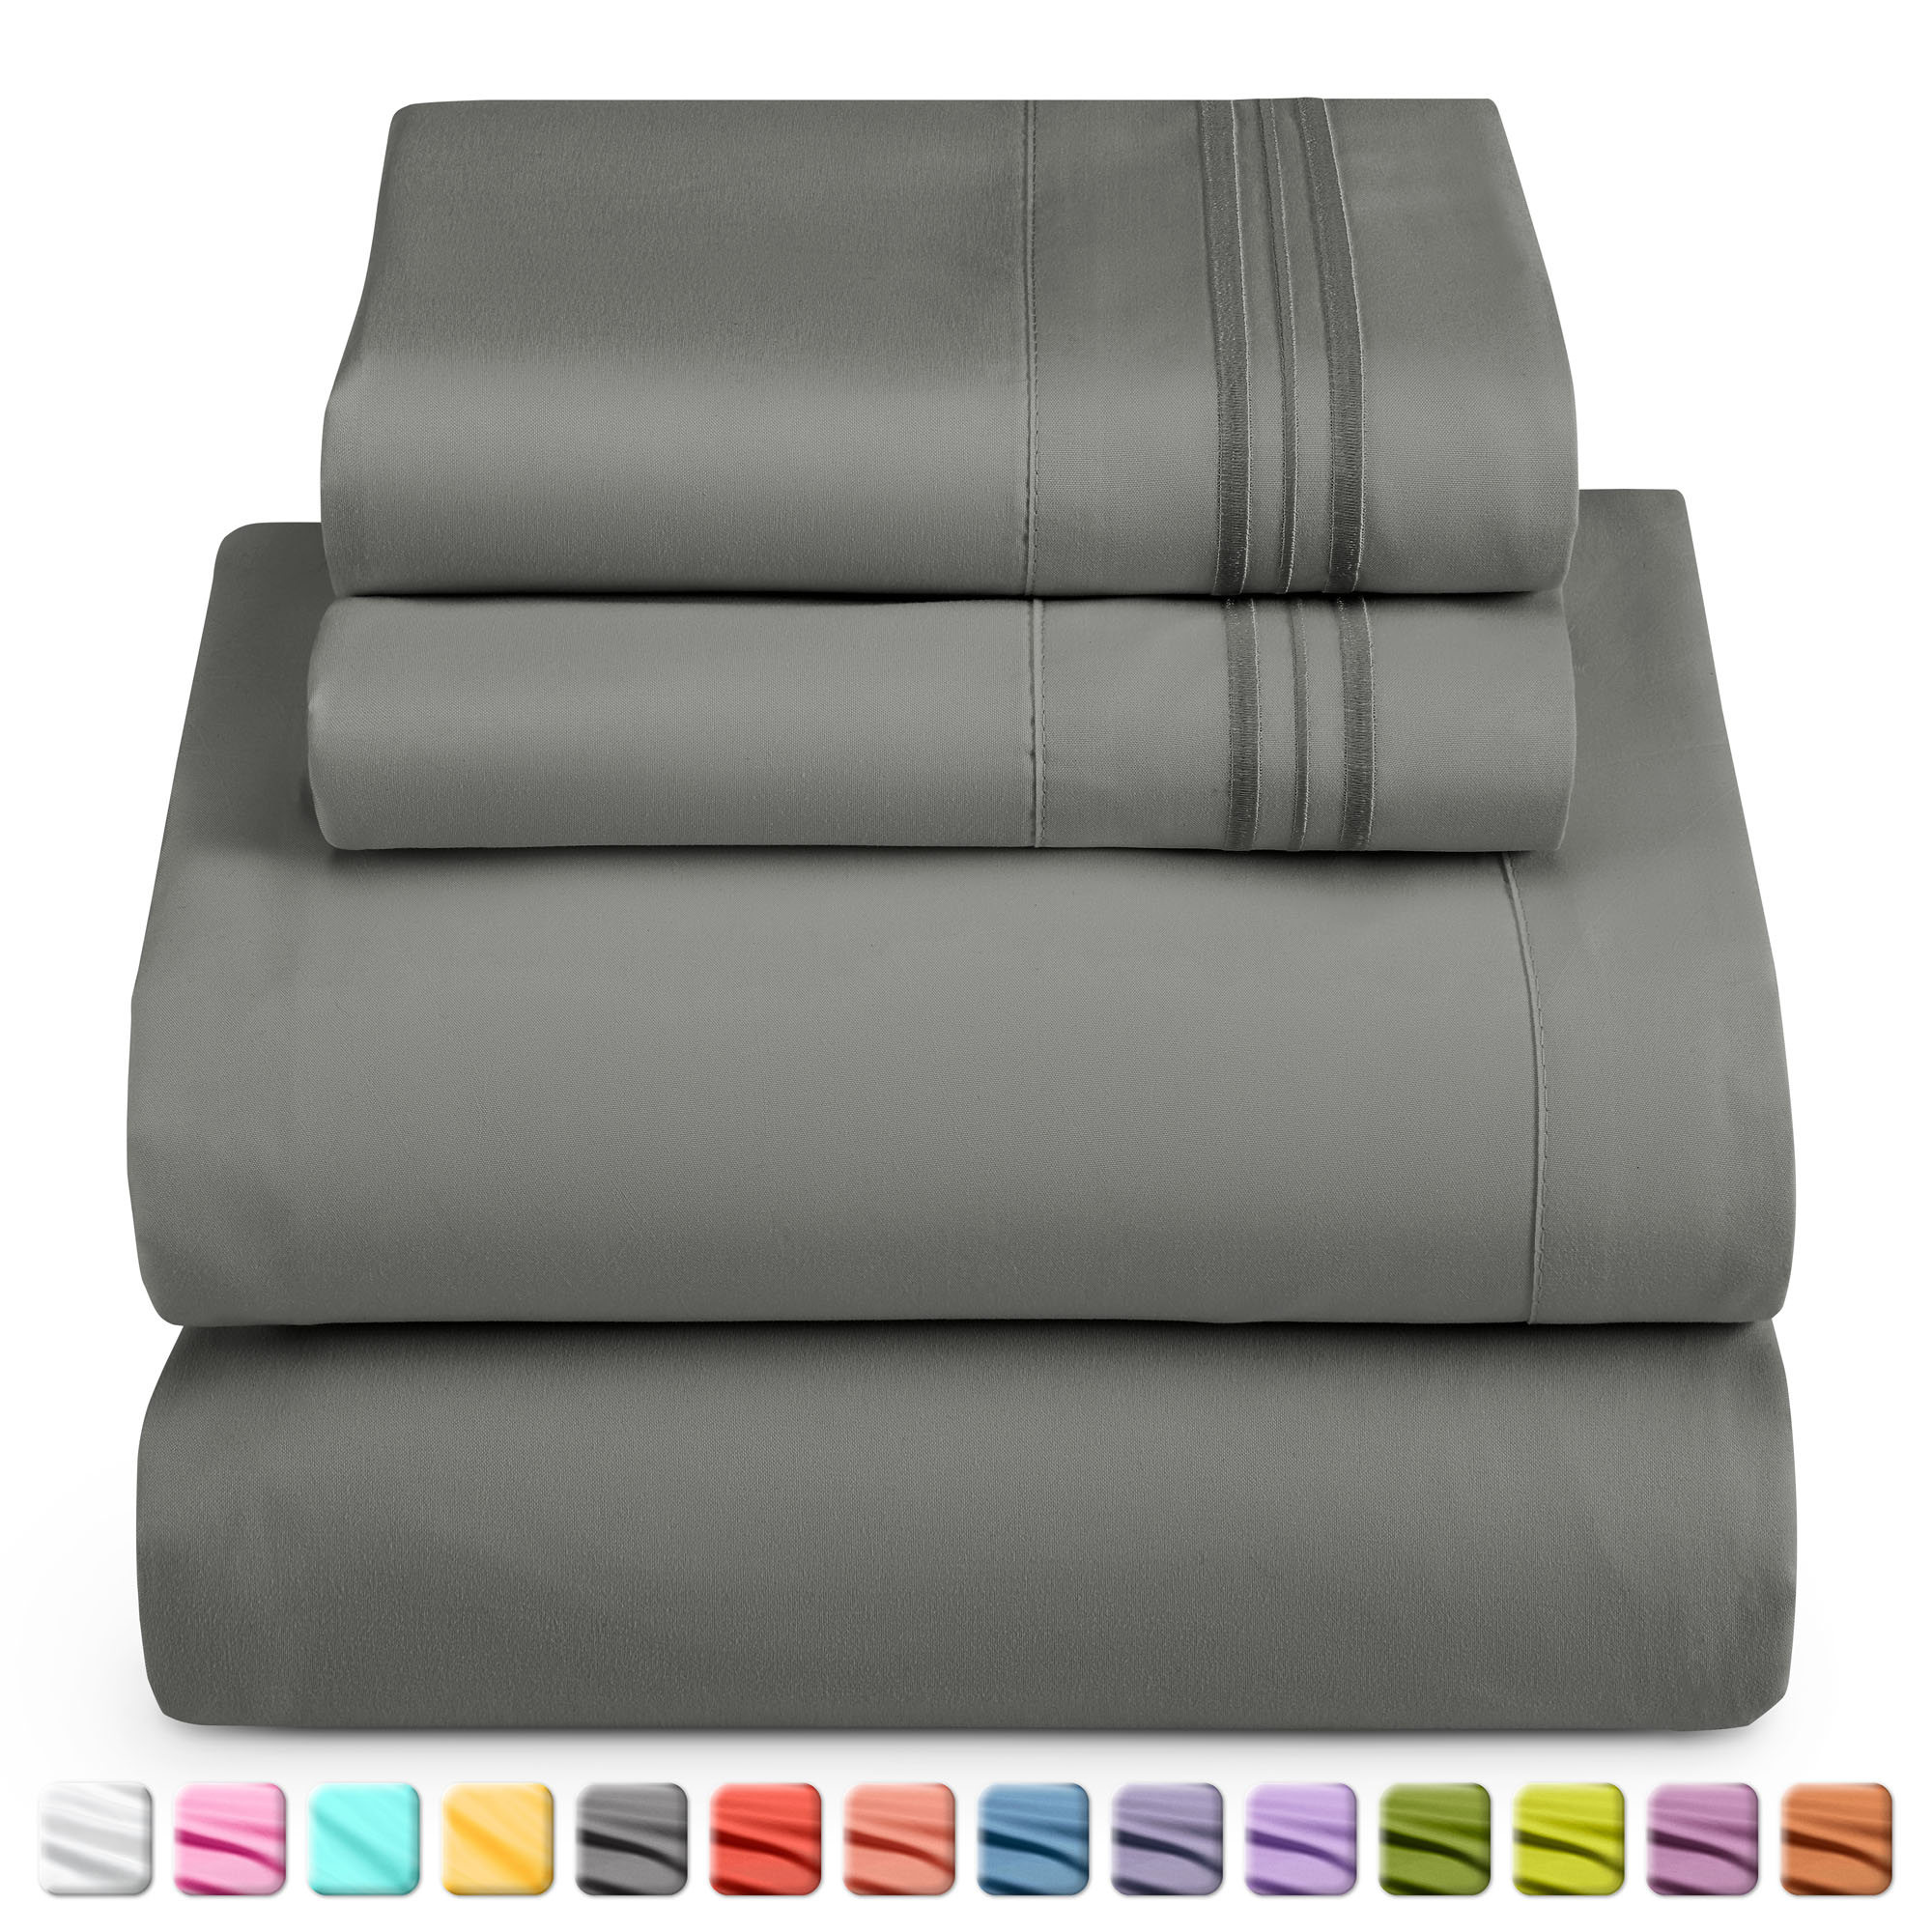 Nestl Bed Sheets Set, 1800 Series Soft Microfiber 16 Inches Deep Pocket 4 Piece Queen Sheet Set, Gray - image 1 of 10